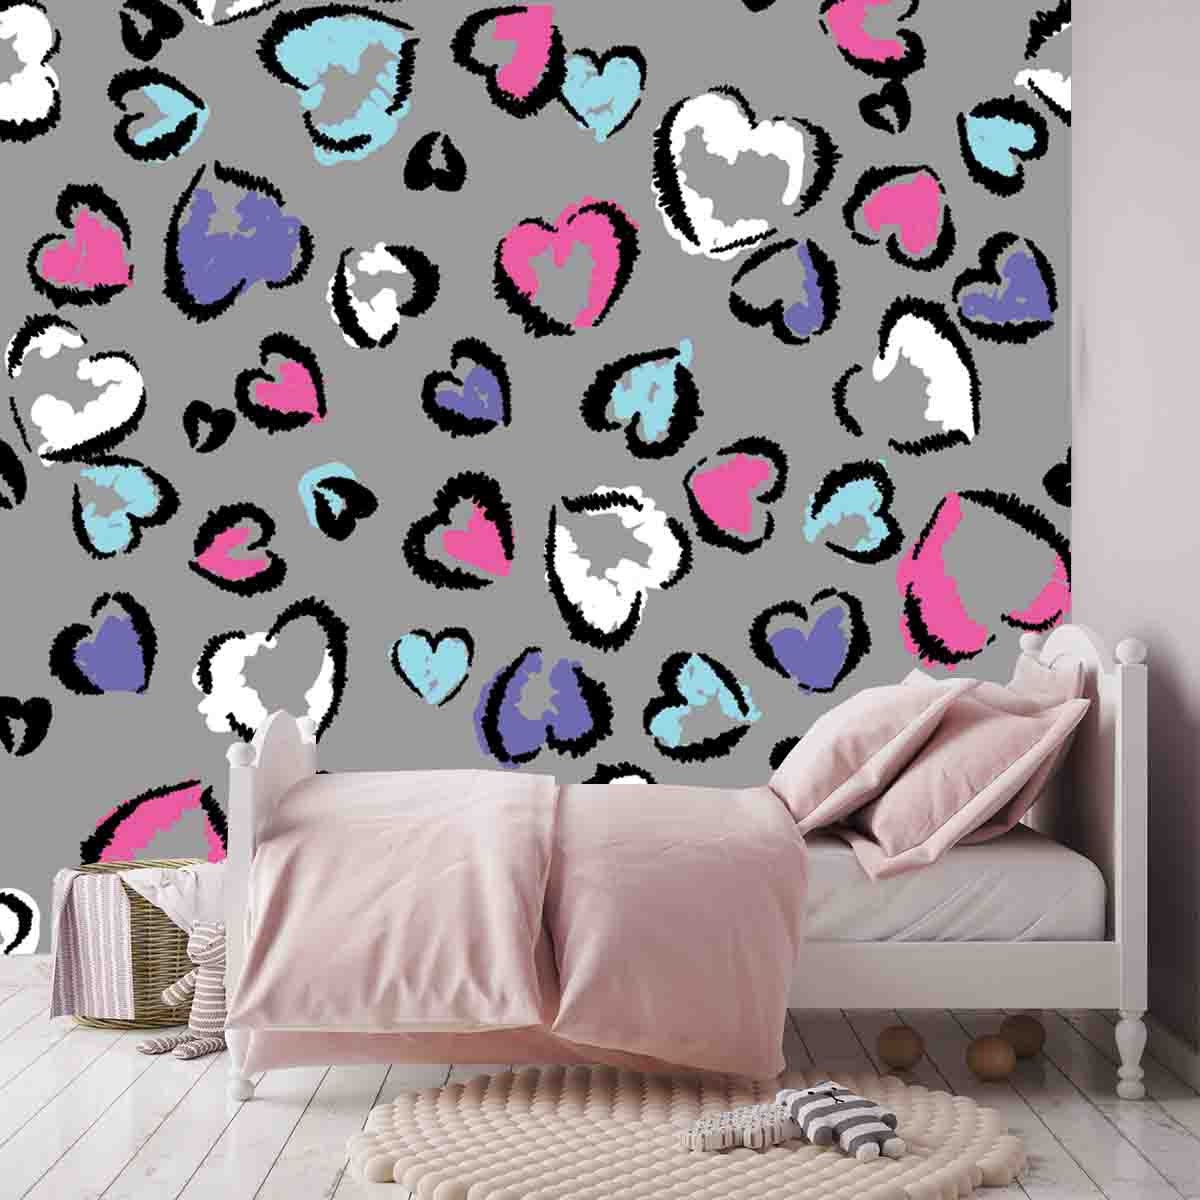 Abstract Seamless Chaotic Leopard Print with Hearts Elements Wallpaper Girls Bedroom Mural